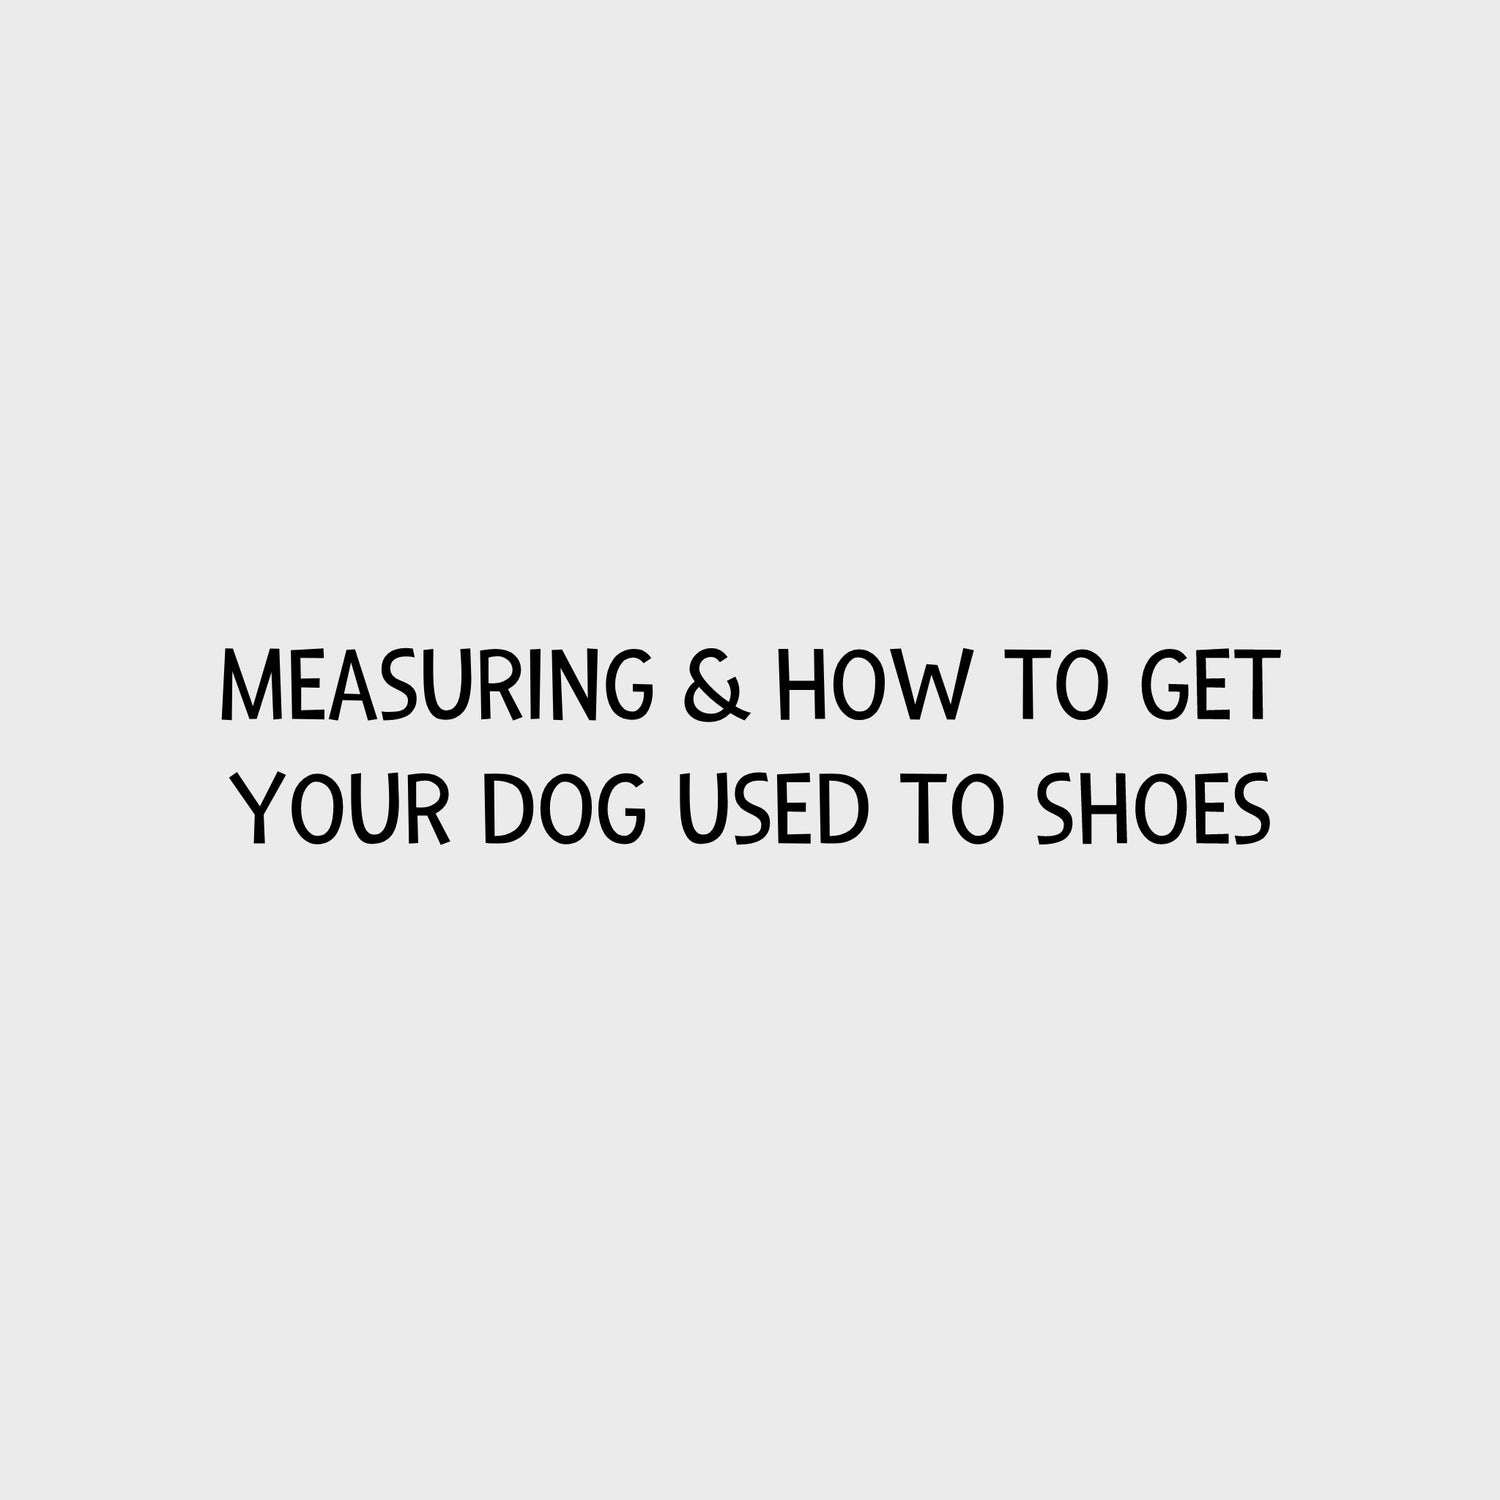 Video - Kurgo Measuring &amp; How to get your dog used to shoes